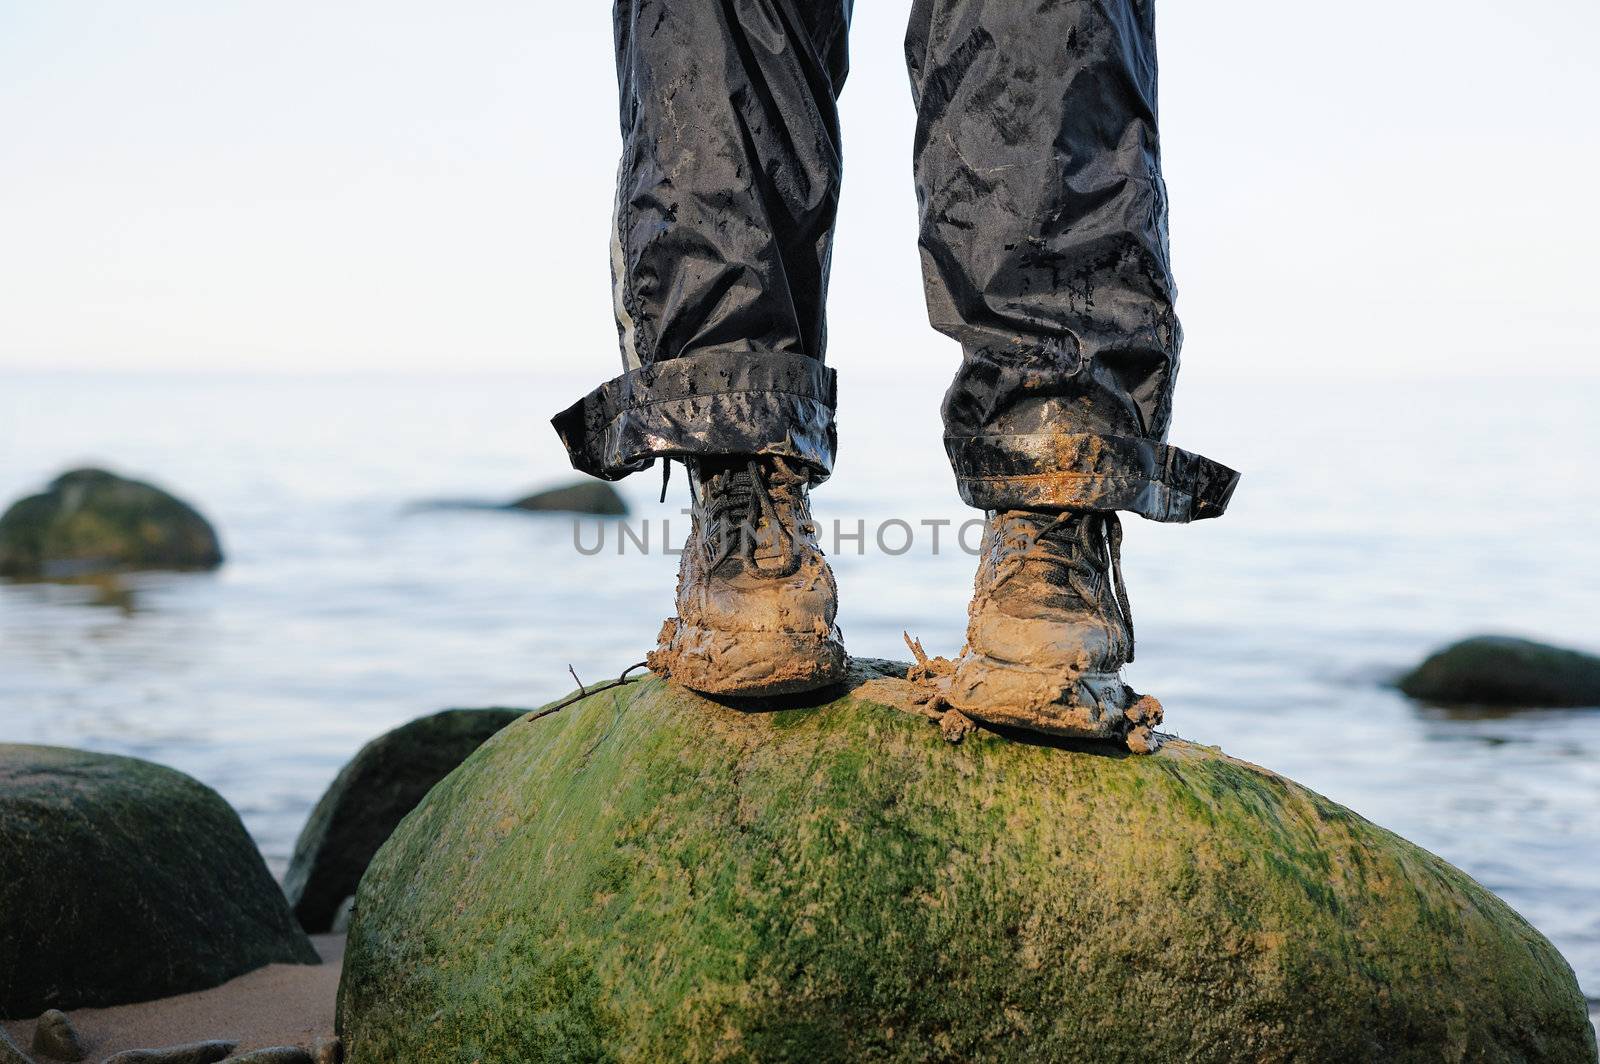 To keep one's footing on the sea boulder